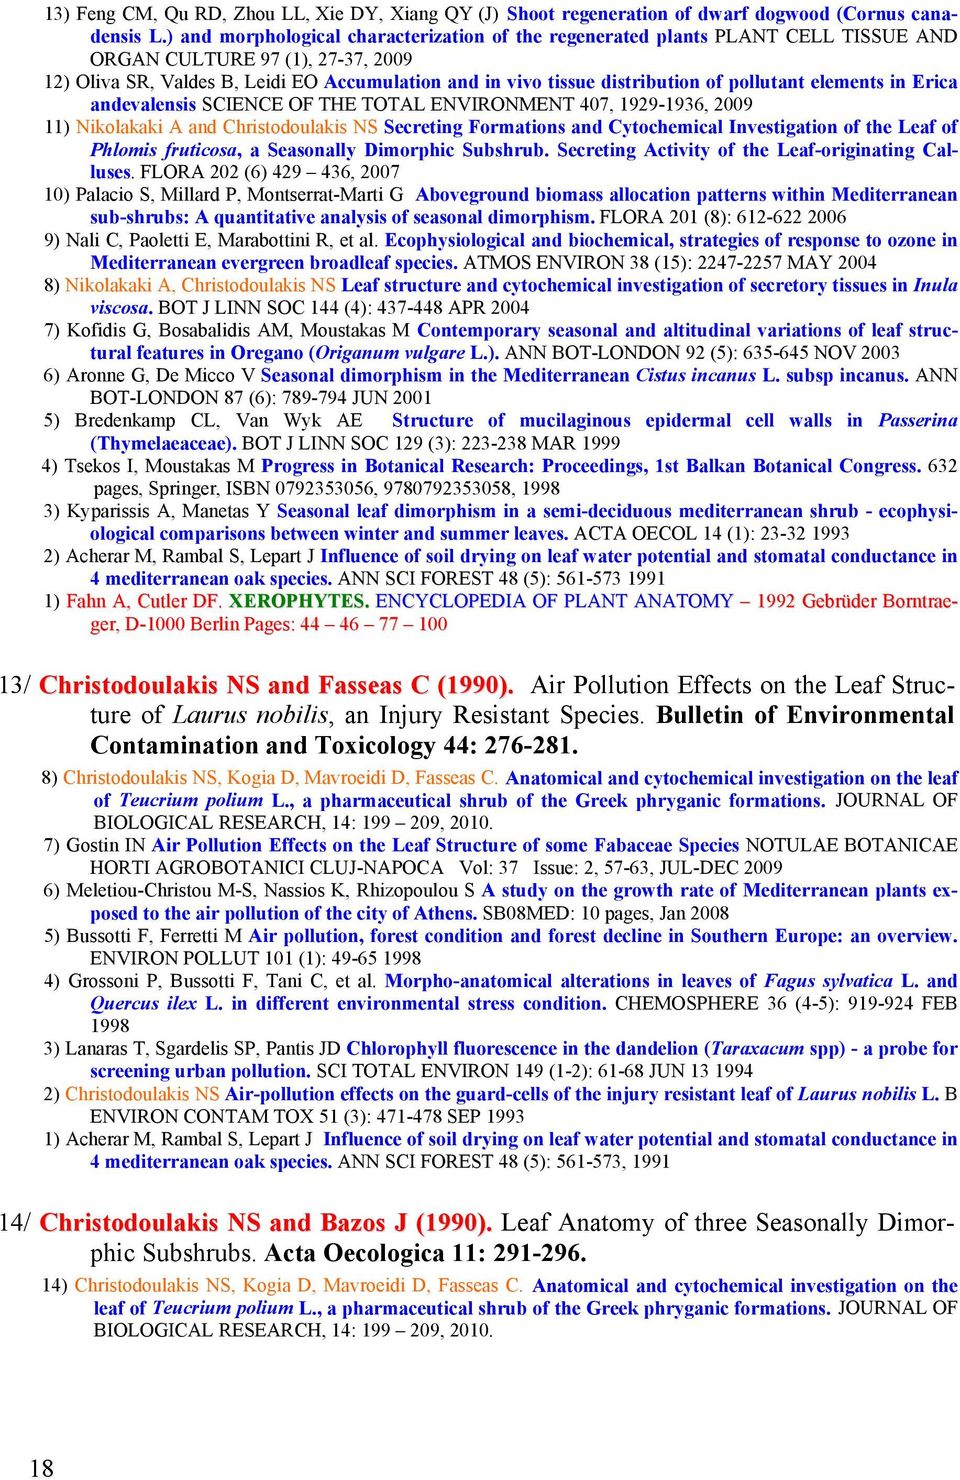 pollutant elements in Erica andevalensis SCIENCE OF THE TOTAL ENVIRONMENT 407, 1929-1936, 2009 11) Nikolakaki A and Christodoulakis NS Secreting Formations and Cytochemical Investigation of the Leaf